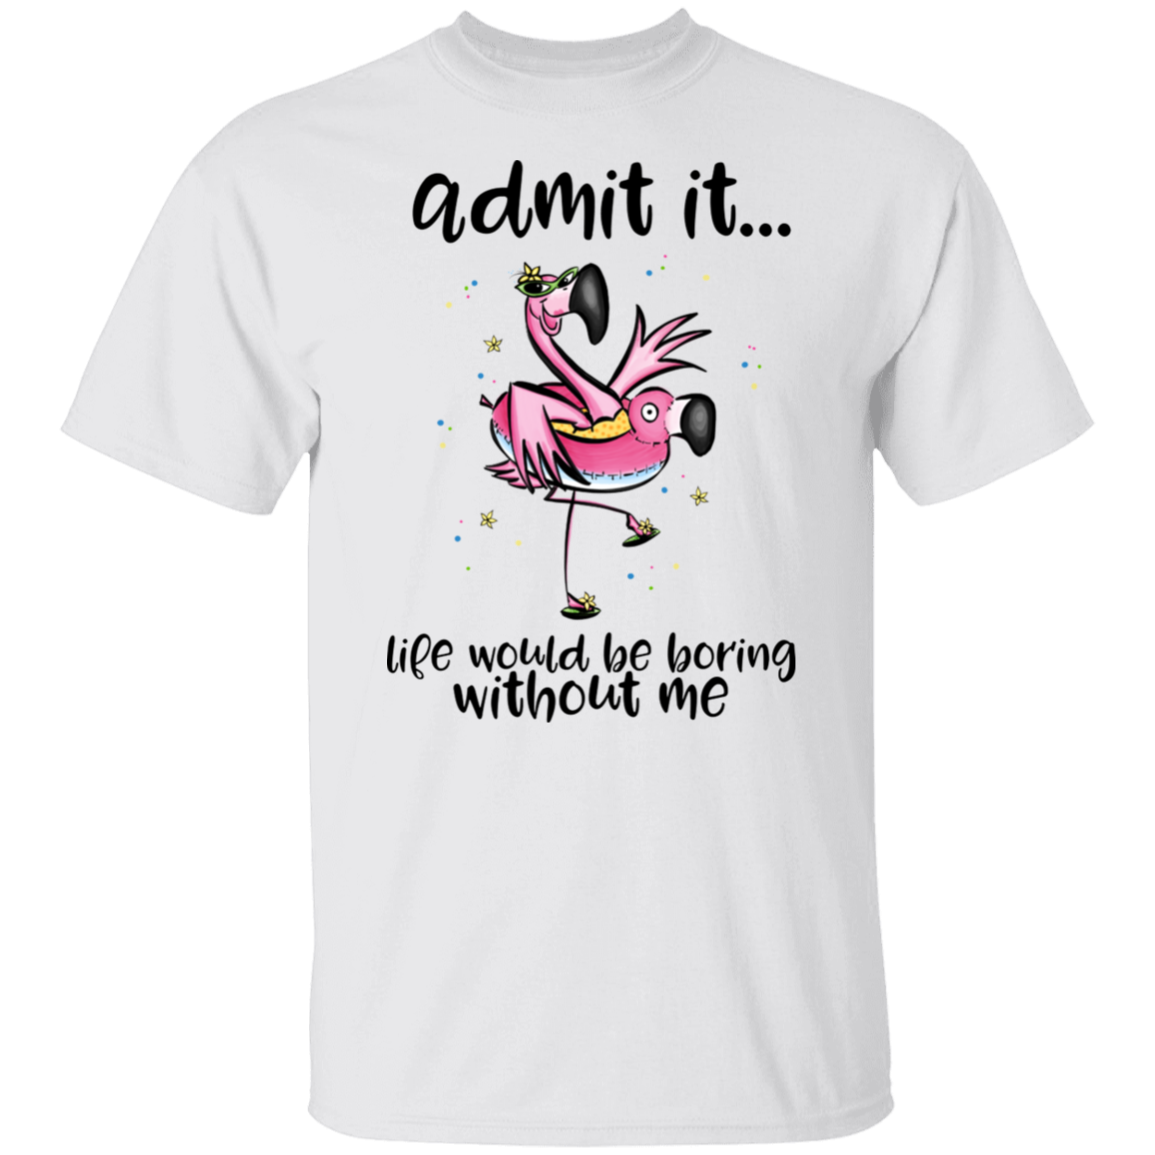 Life Would Be Boring Without Me T-Shirt